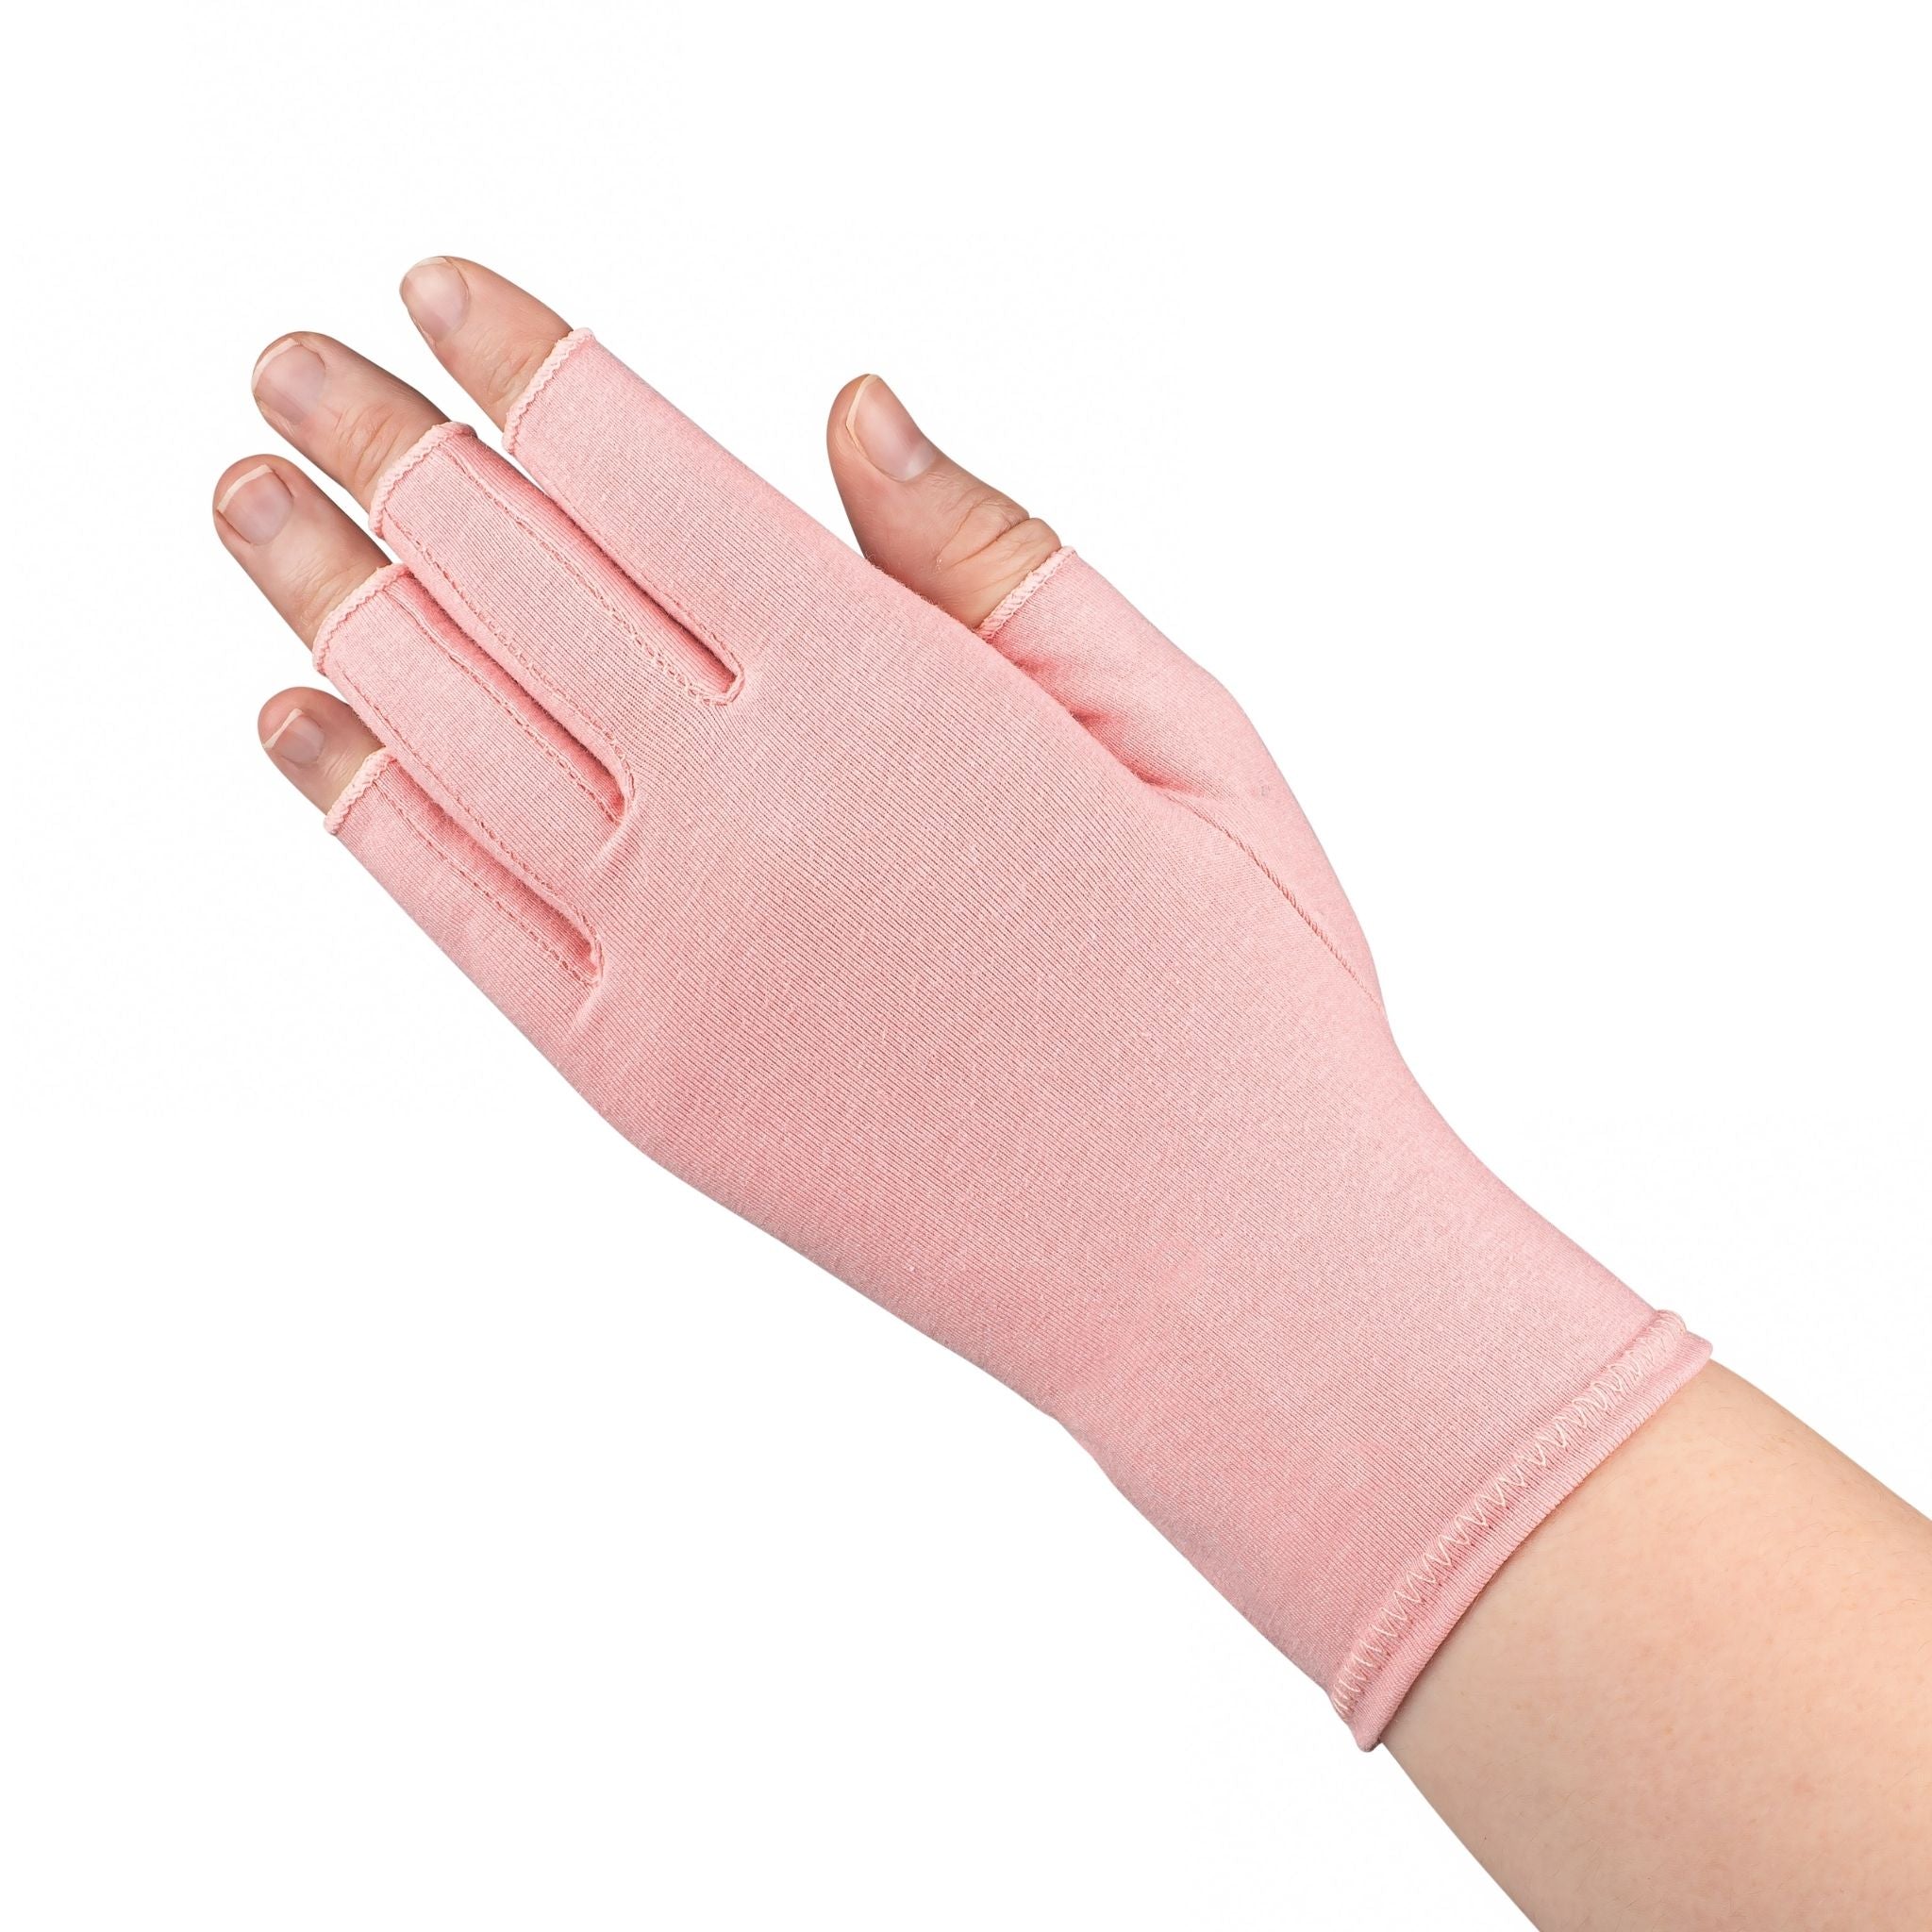 A close up of the hand of a woman with arthritis,  wearing Ballet Pink Compression Gloves and showing the back of her hand.